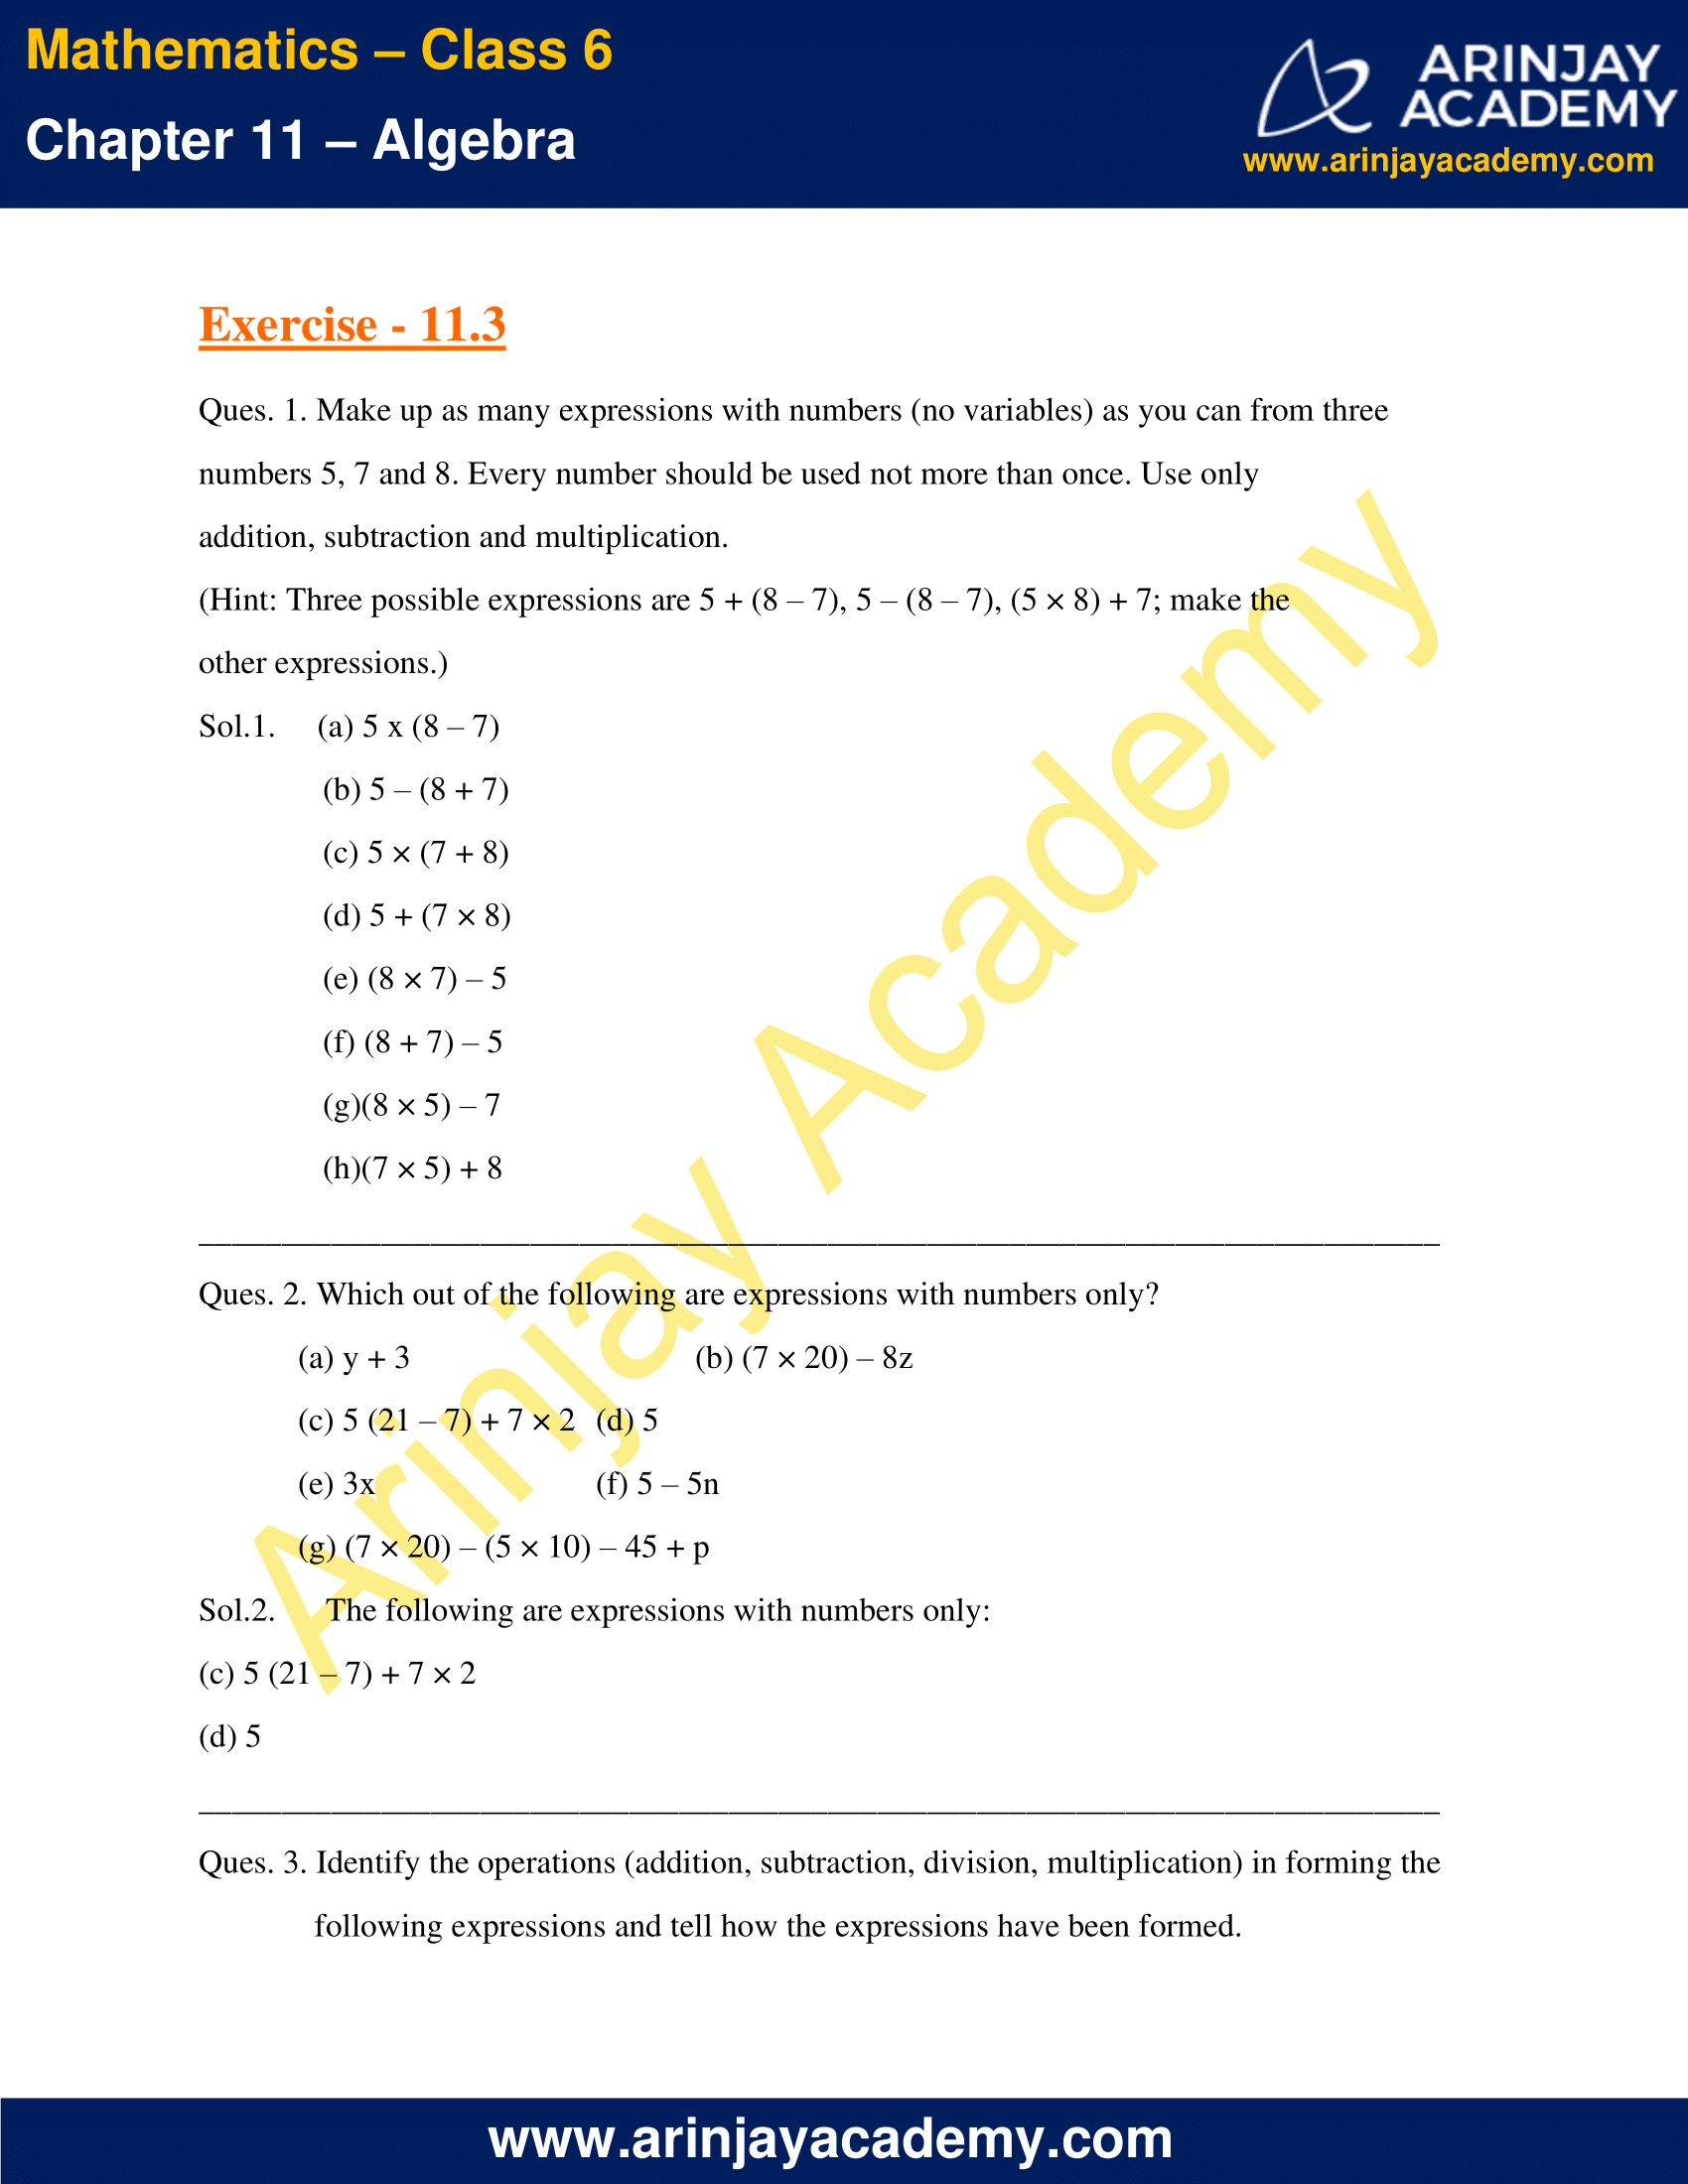 NCERT Solutions for Class 6 Maths Chapter 11 Exercise 11.3 image 1